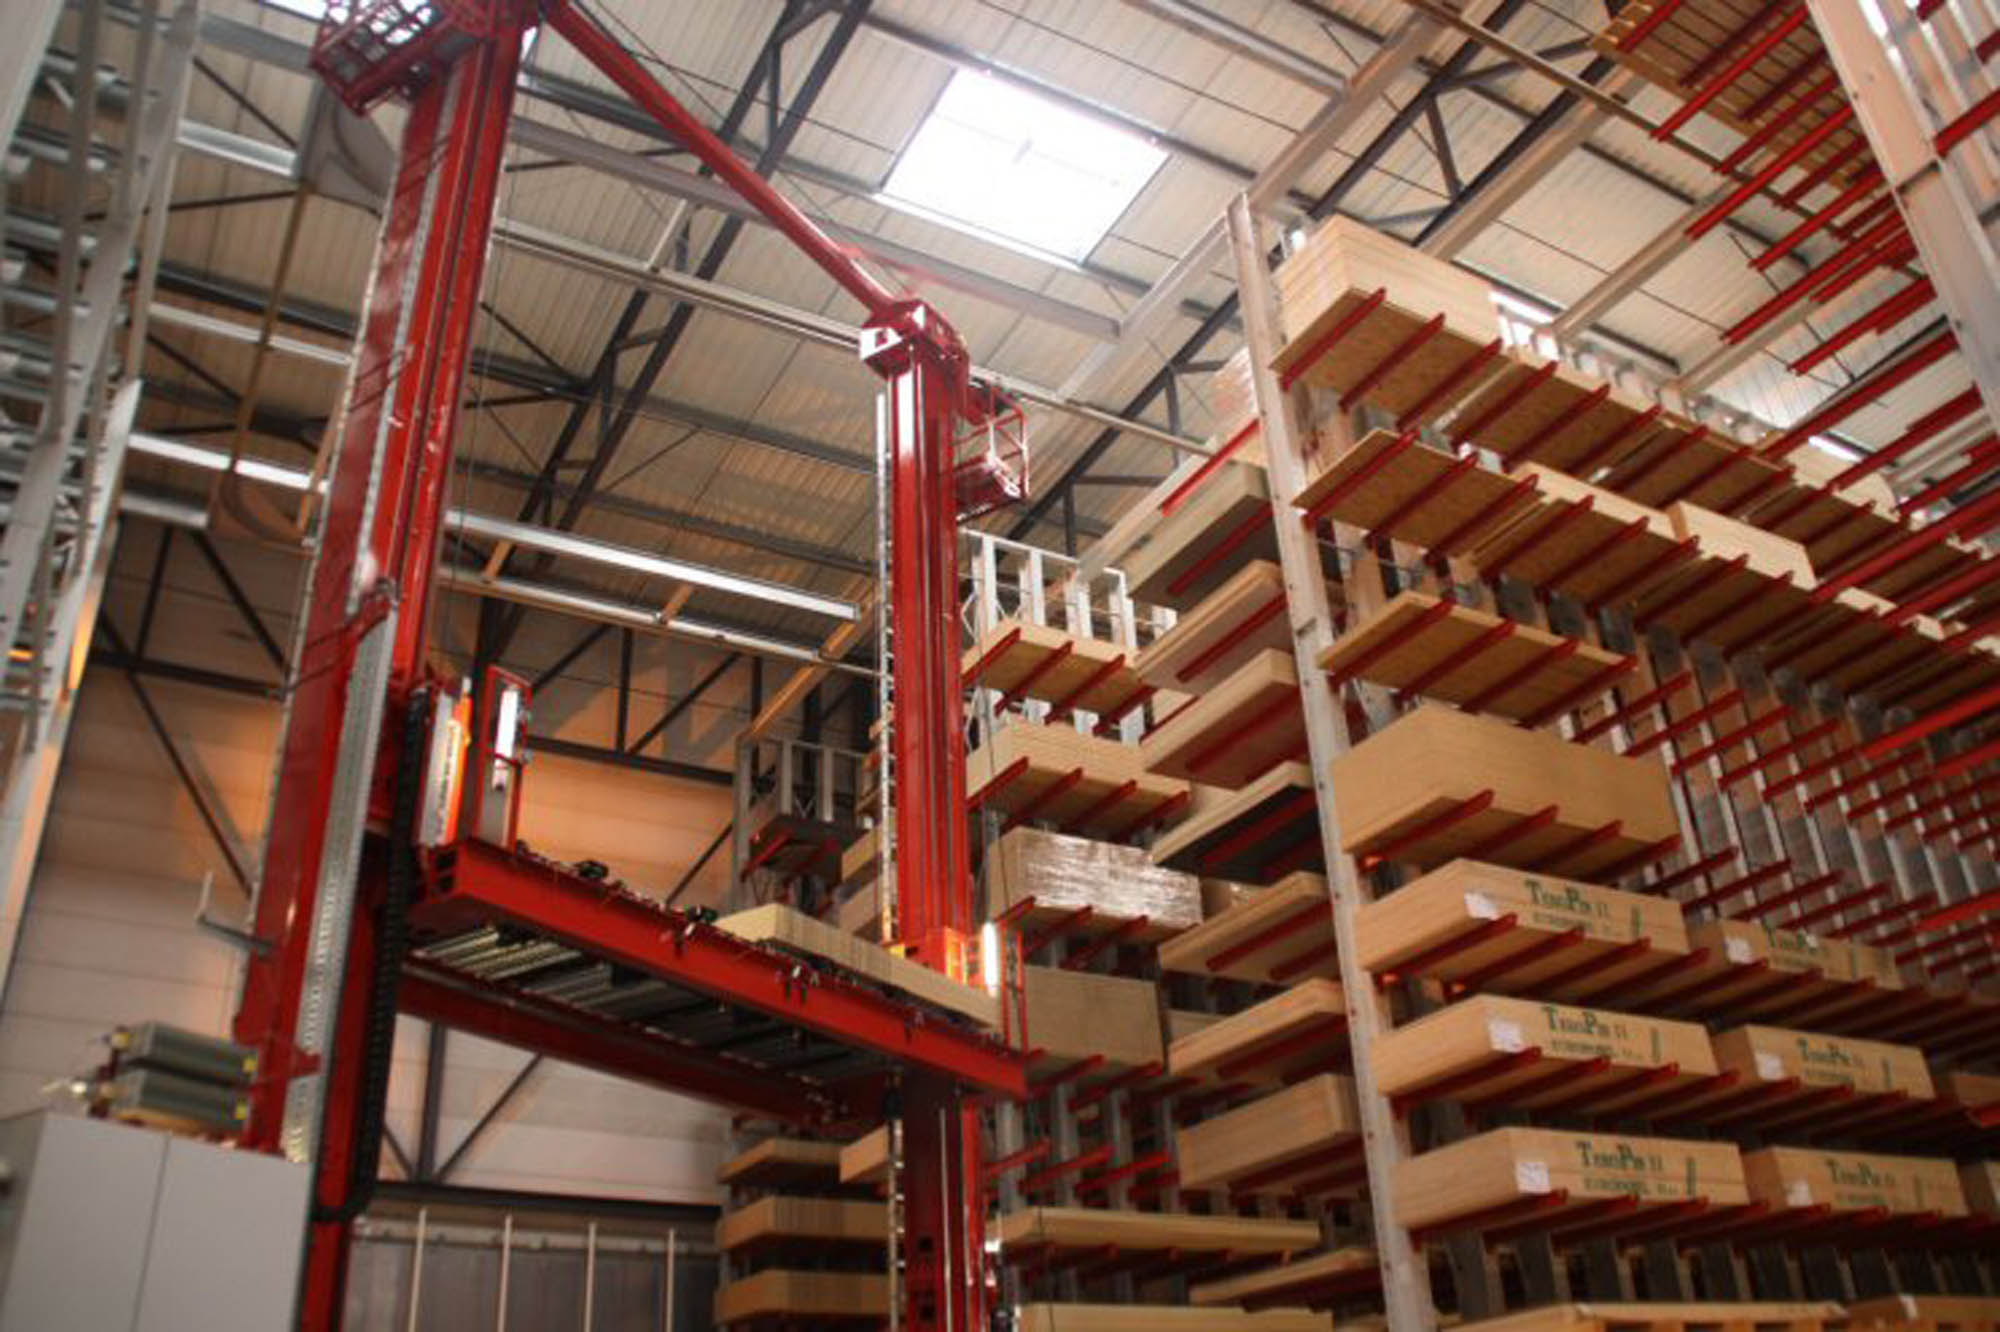 Stacker crane in an automatic storage system